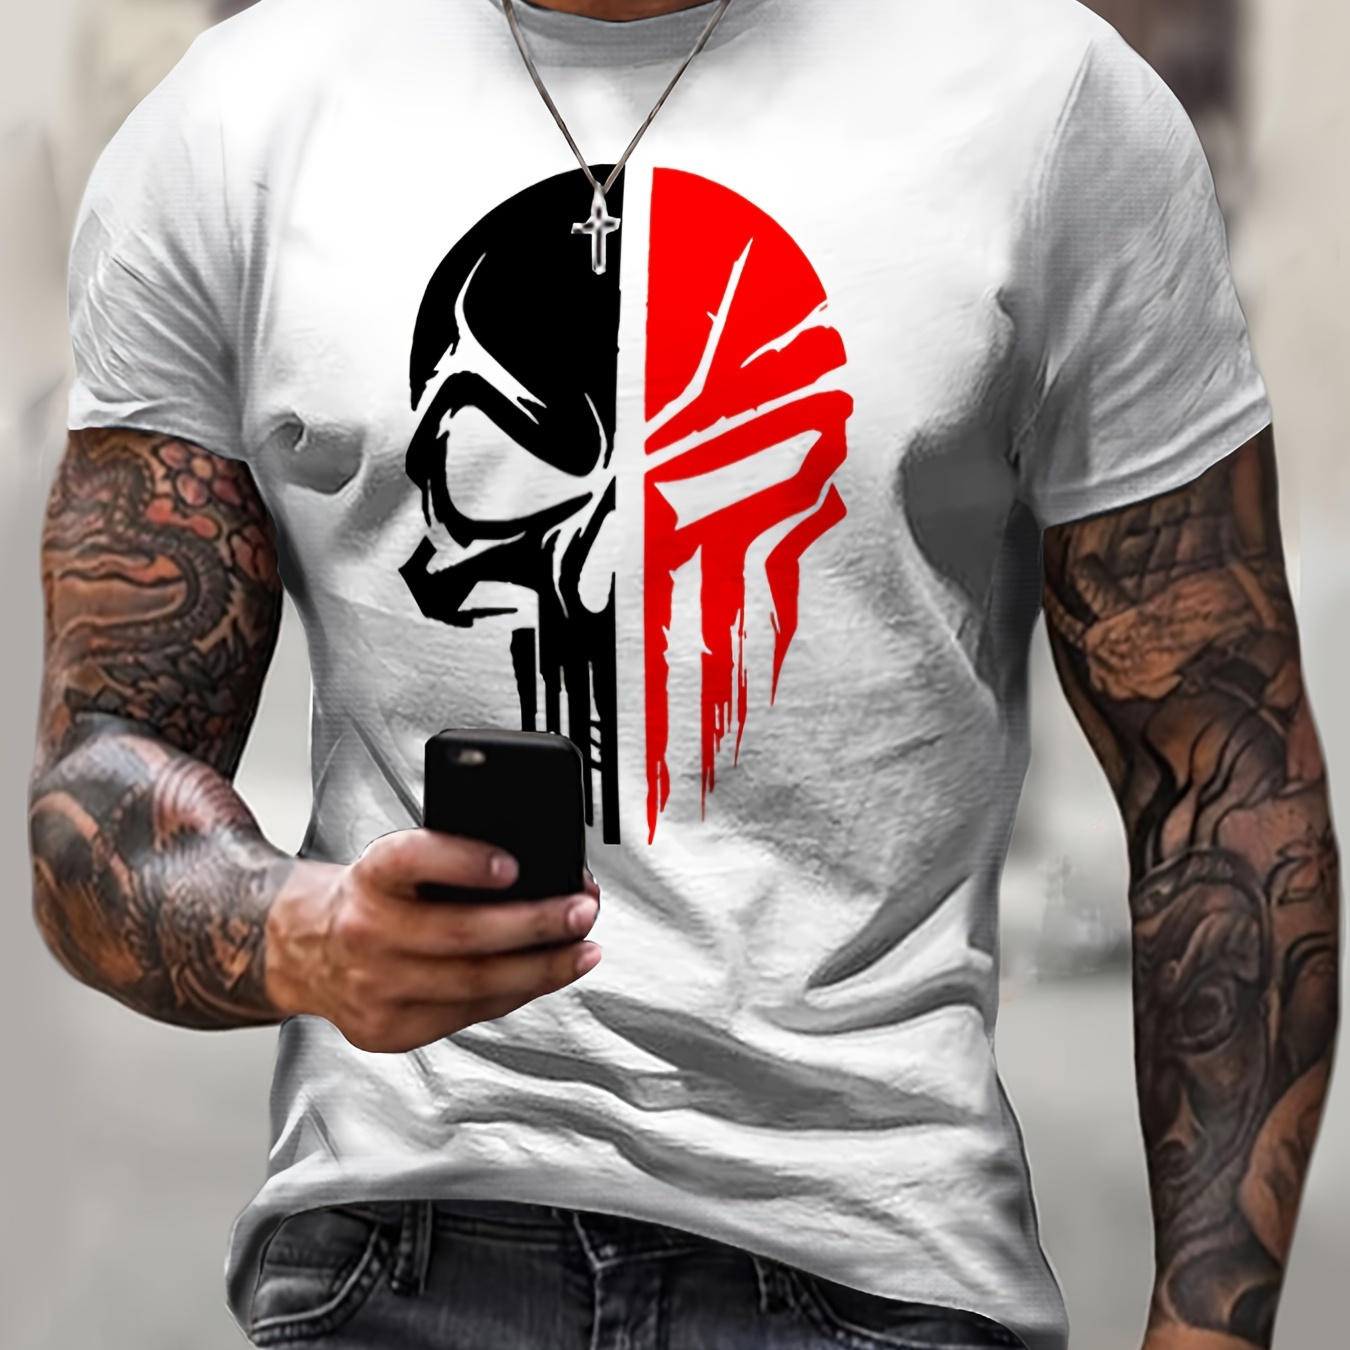 

Men's Stylish Skull Pattern Shirt, Casual Breathable Crew Neck Short Sleeve Tee Top For City Walk Street Hanging Outdoor Activities